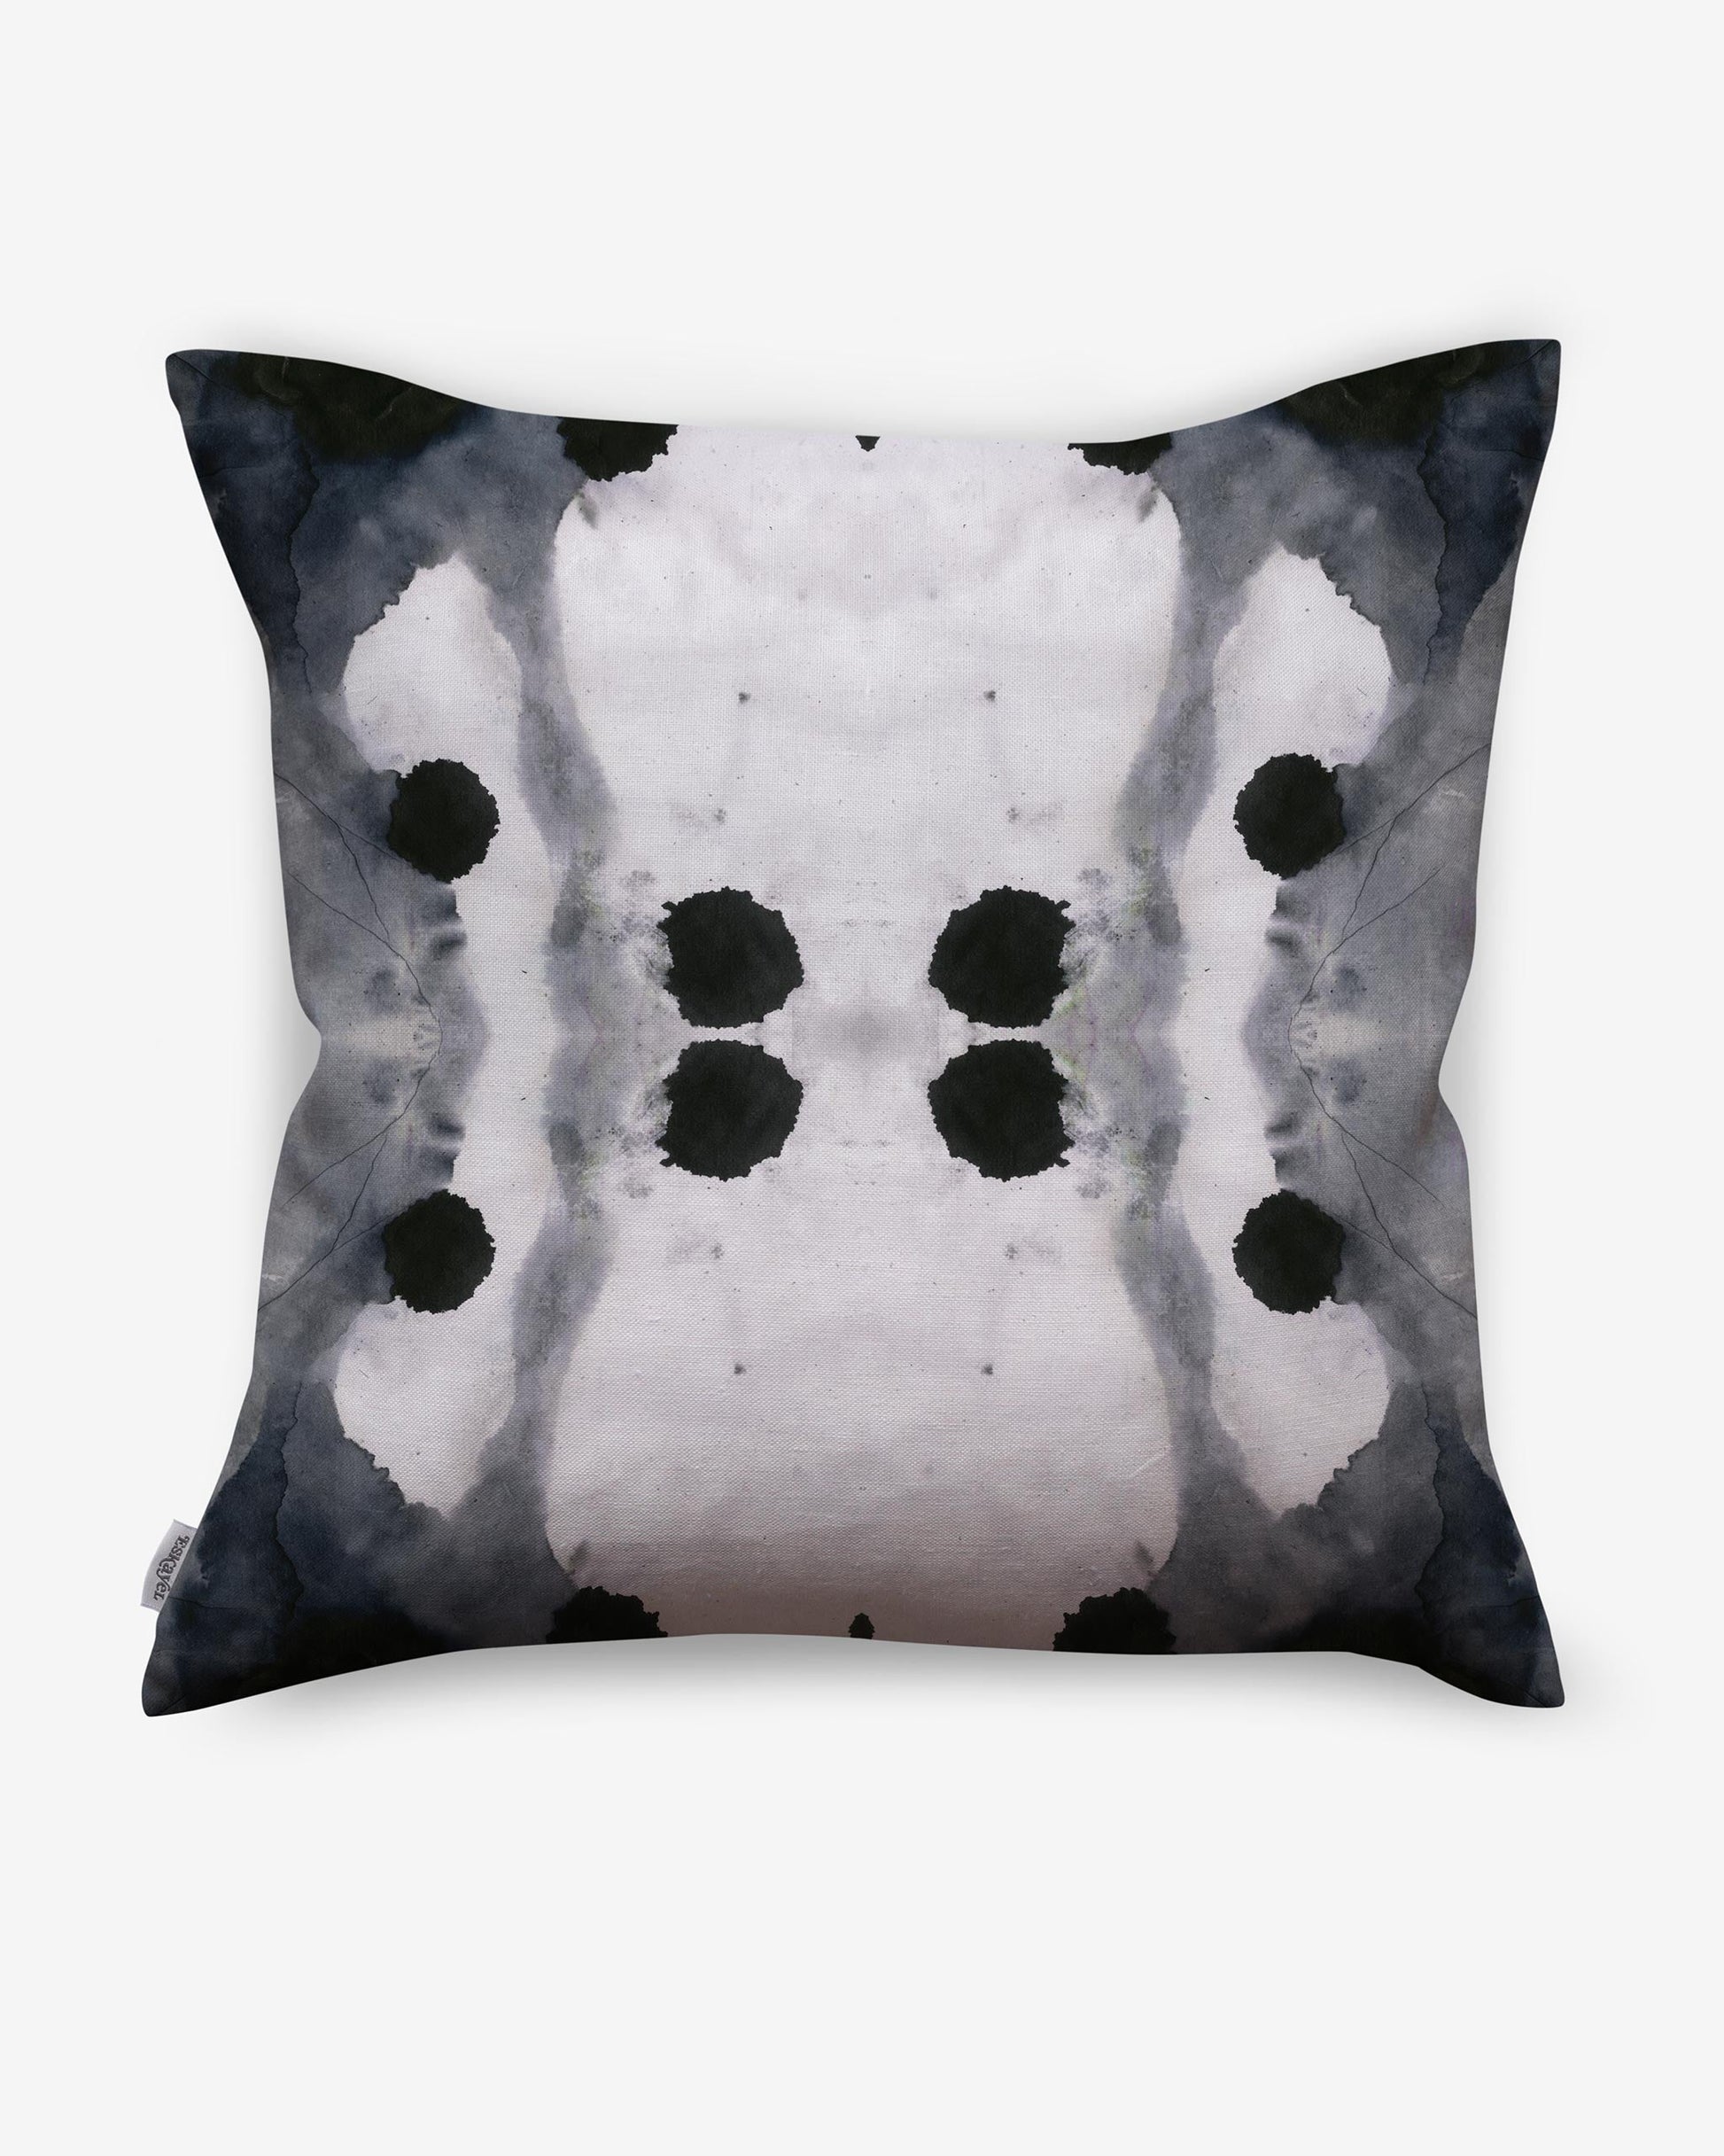 A black and white Dynasty Pillow Indigo with a Tuscany design